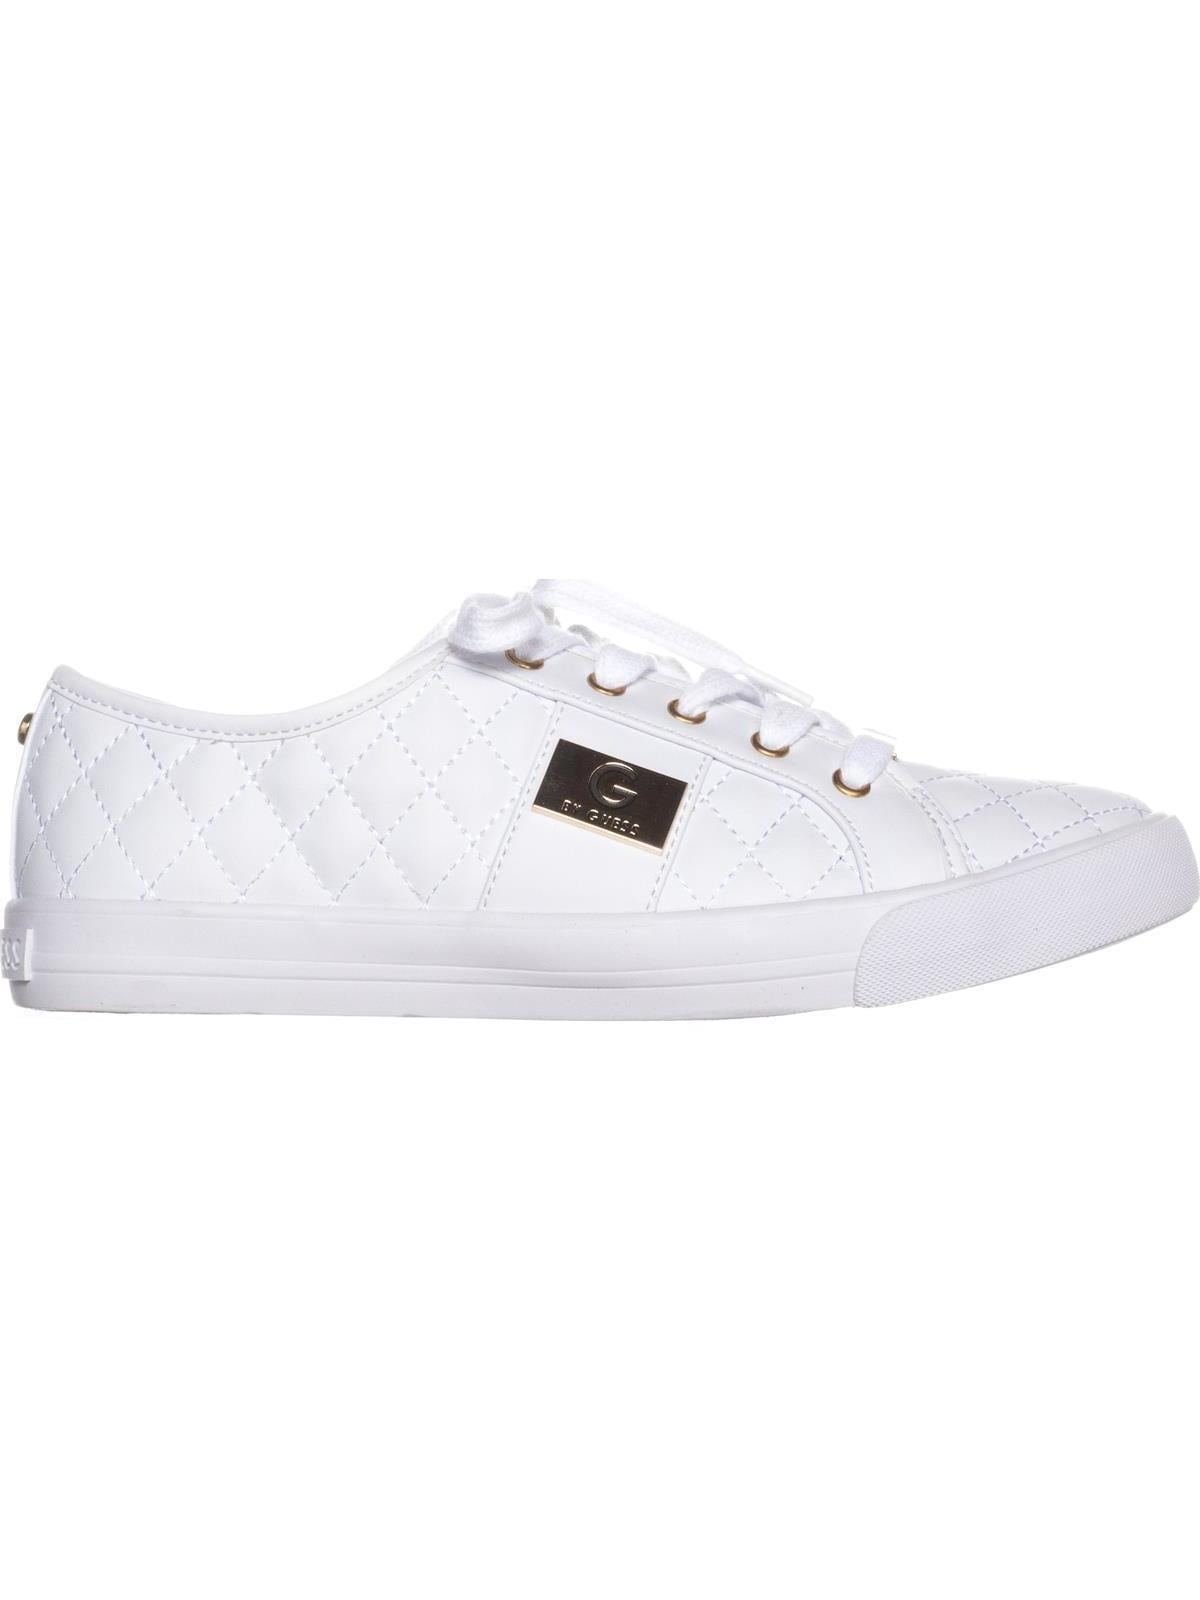 Womens G Backer2 Quilted Fashion Sneakers, White -